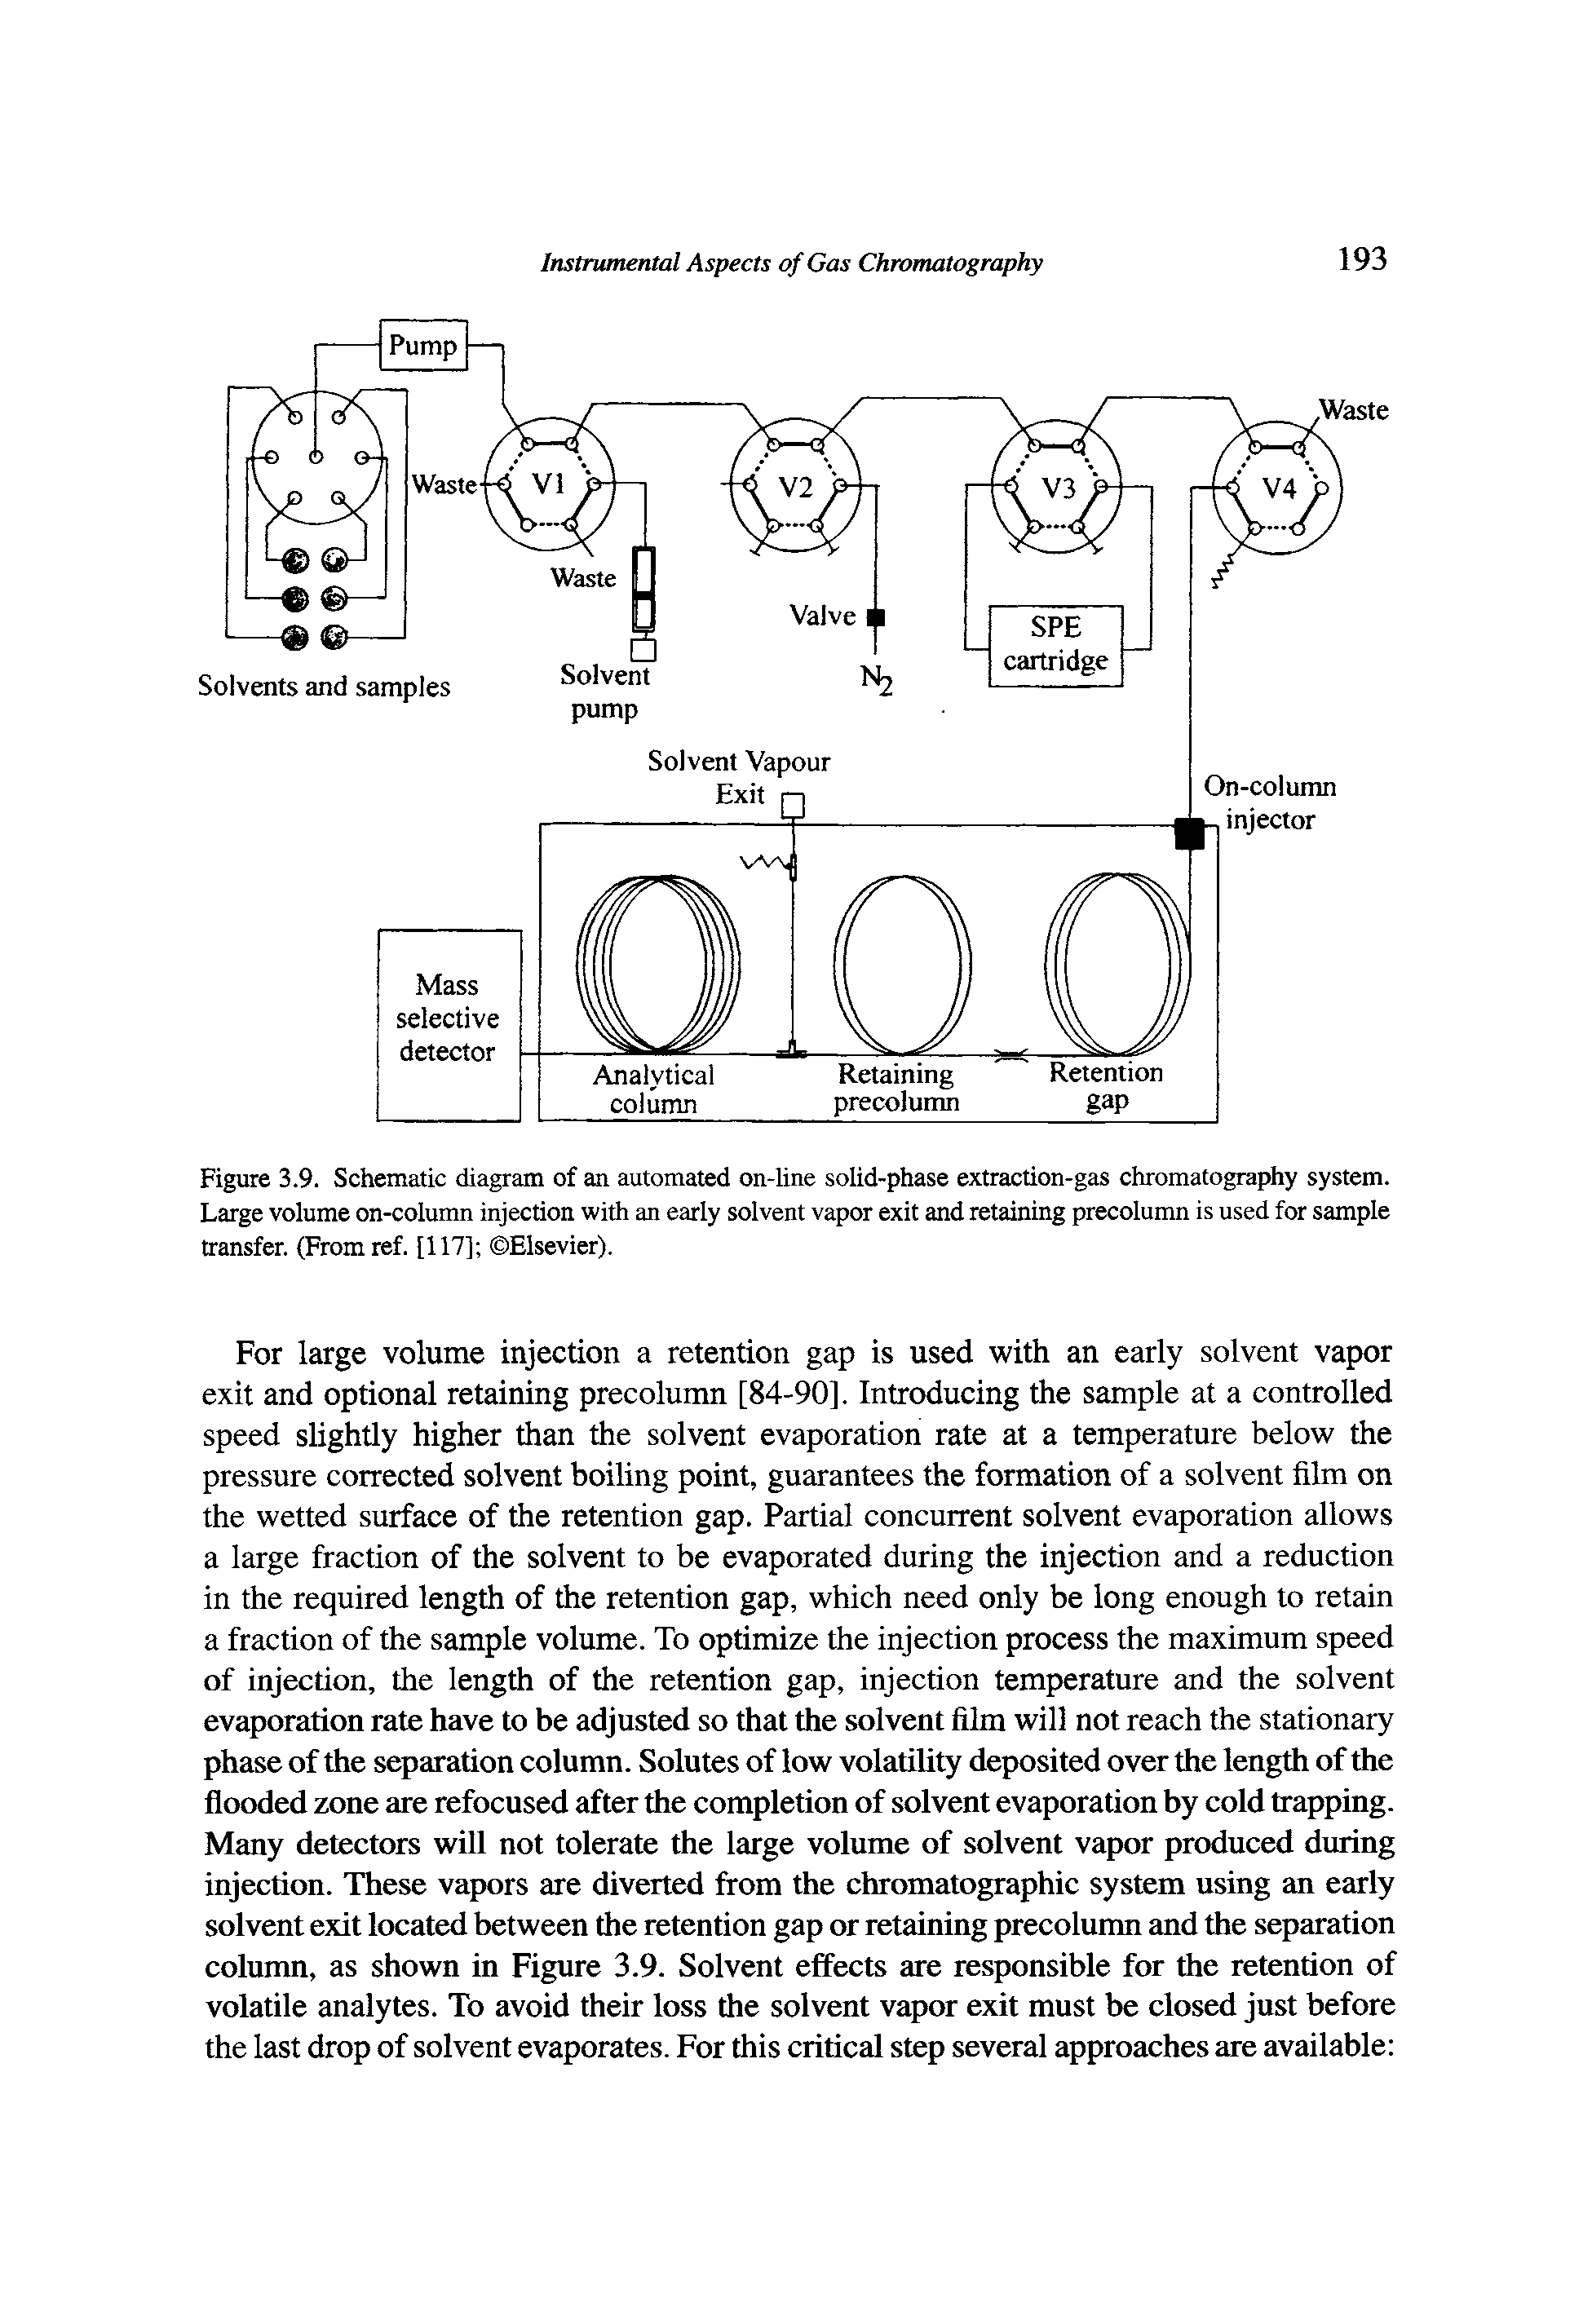 Figure 3.9. Schematic diagram of an automated on-line solid-phase extraction-gas chromatography system. Large volume on-column injection with an early solvent vapor exit and retaining precolumn is used for sample transfer. (From ref. [117] Elsevier).